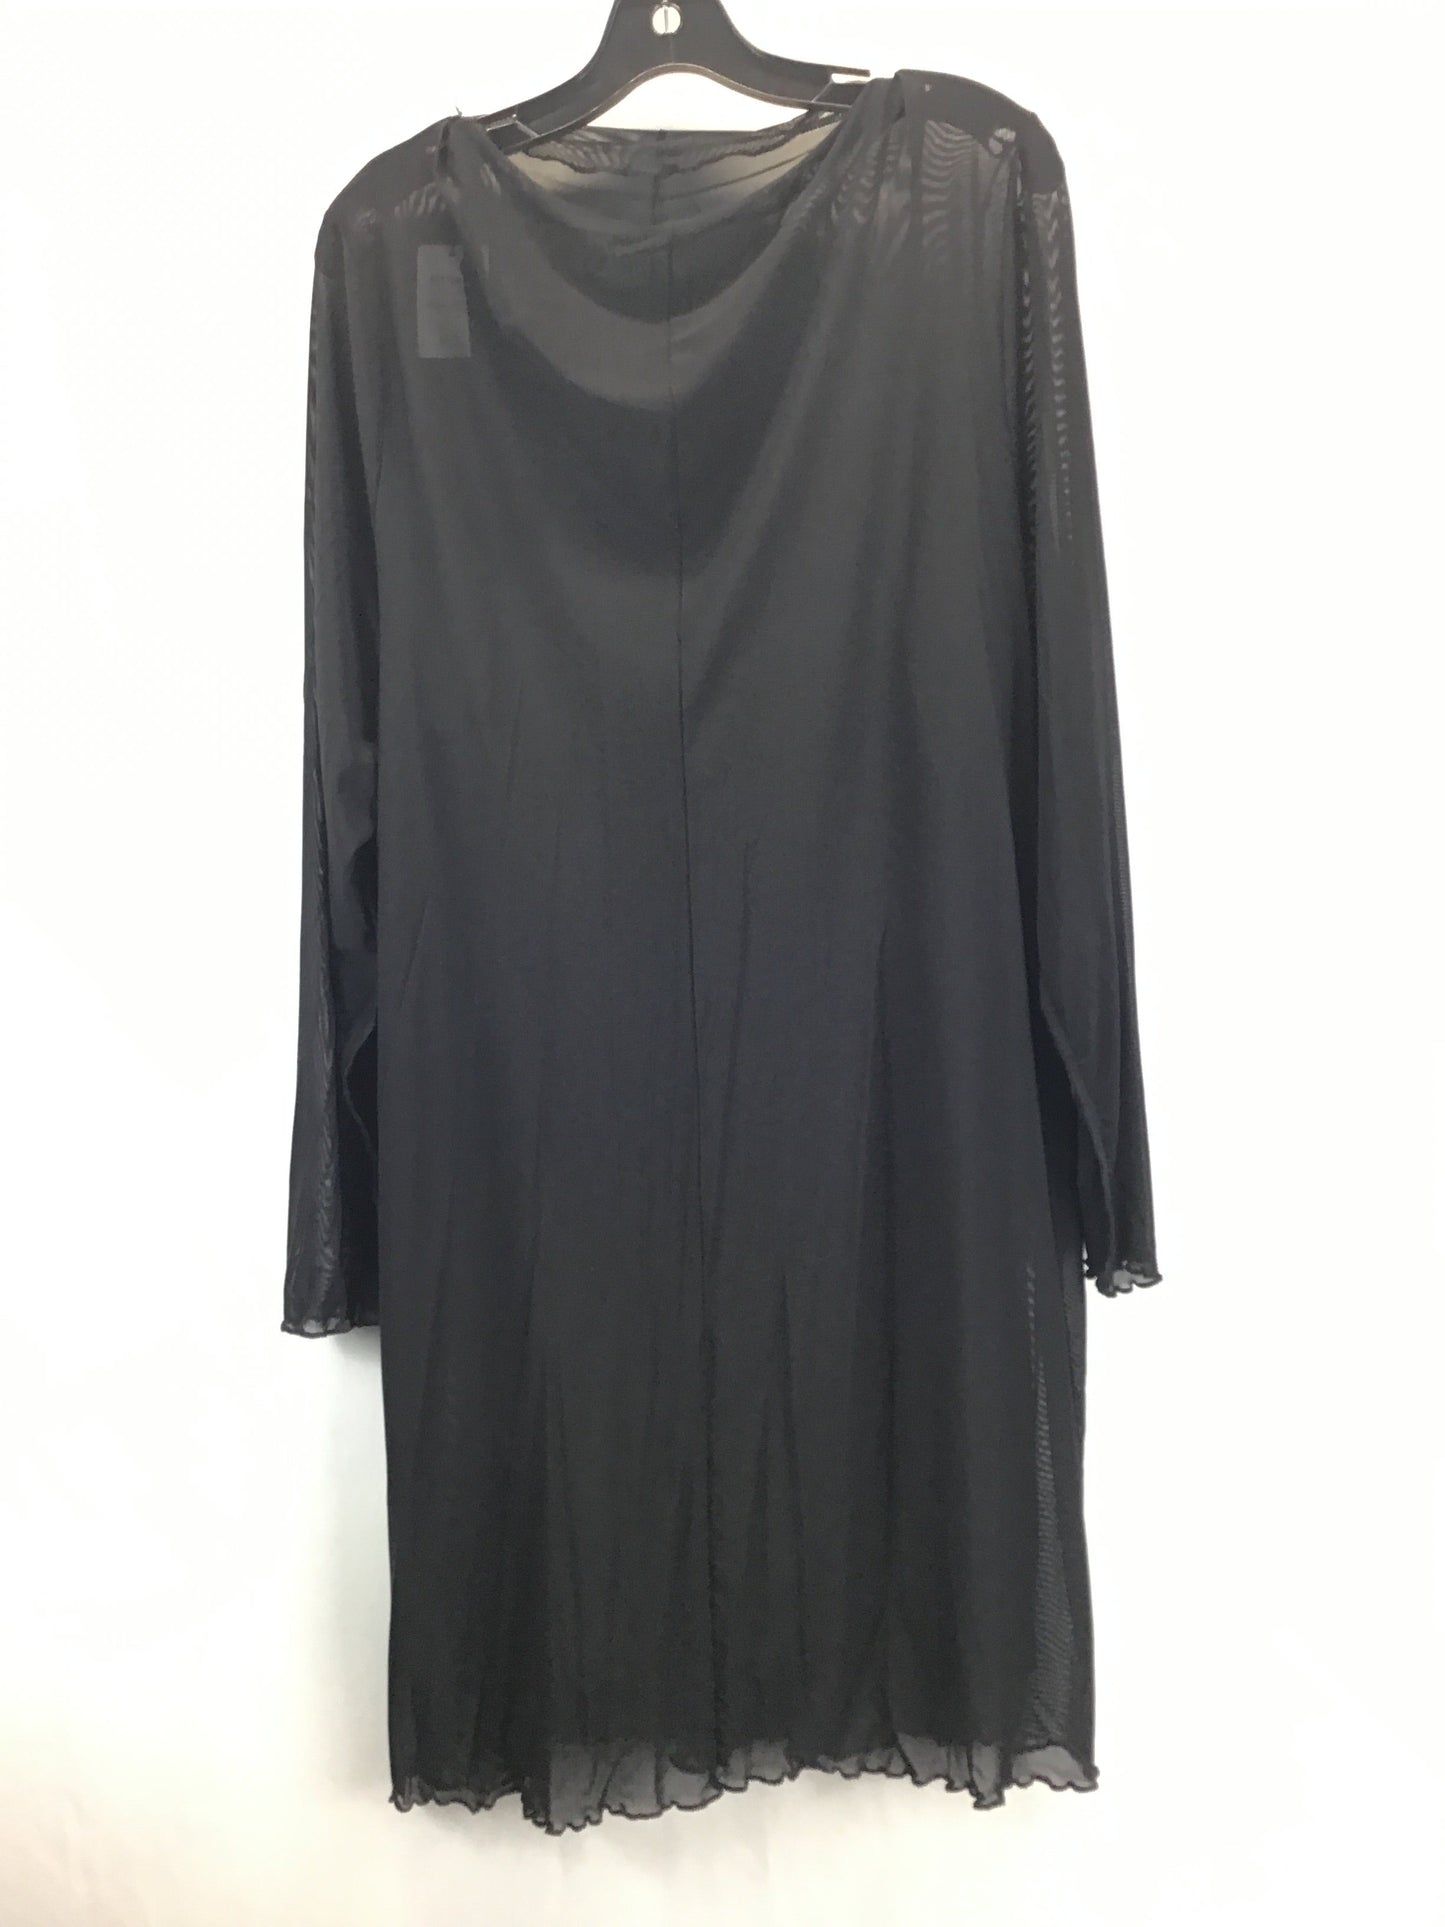 Dress Casual Maxi By Cotton On  Size: 20